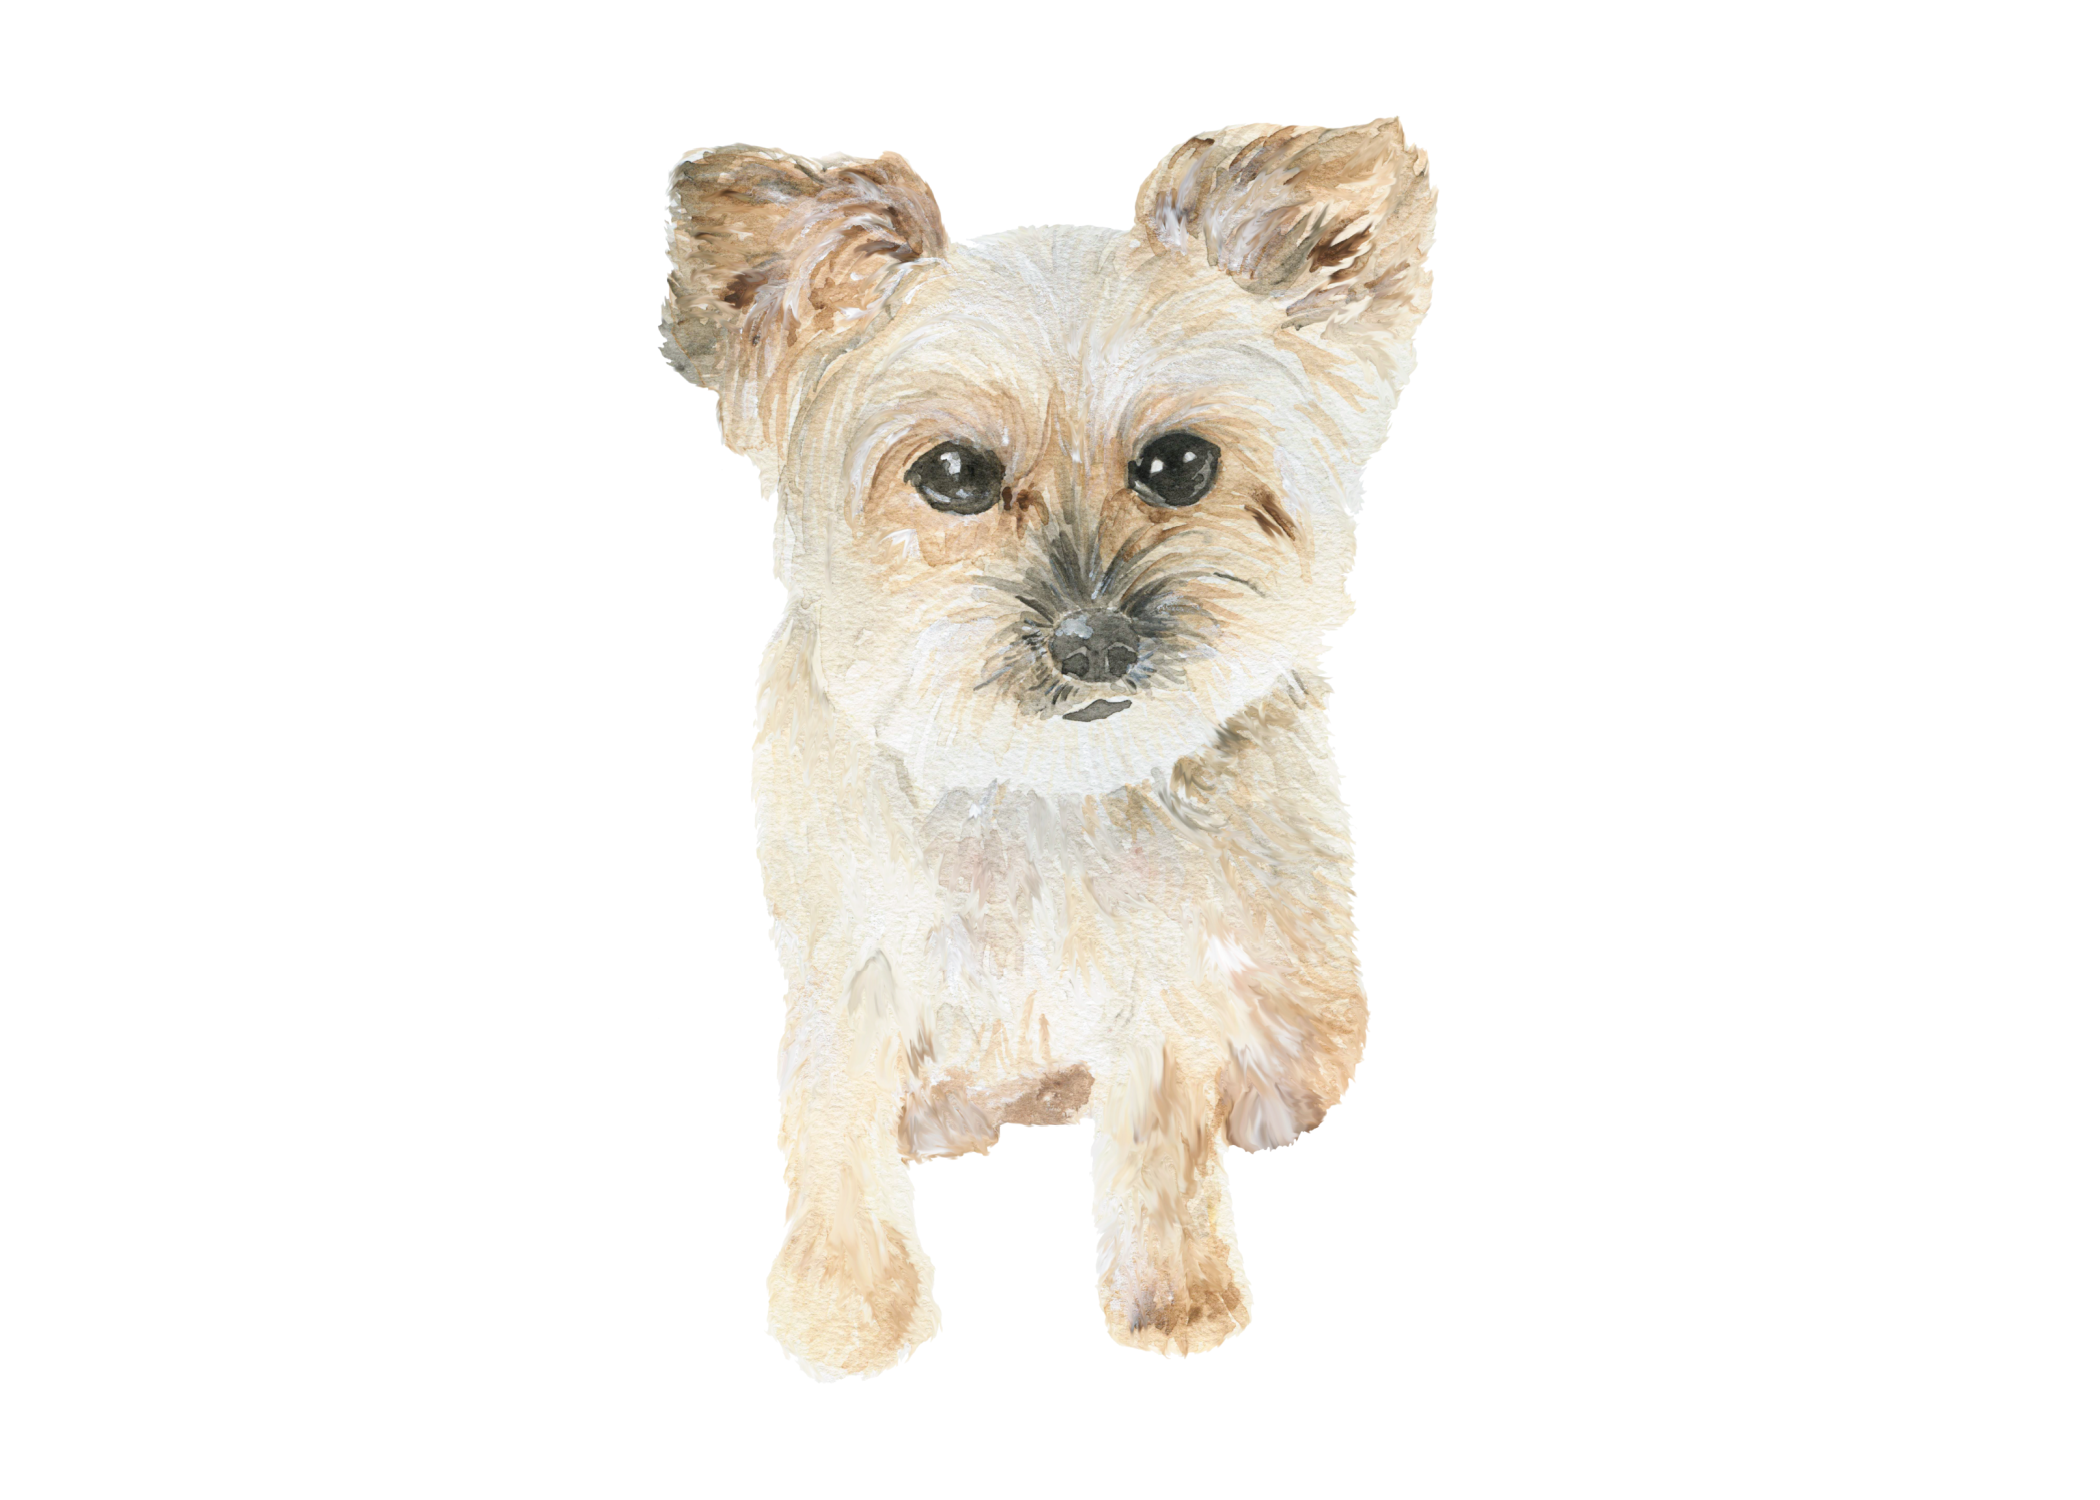 Yorkipoo portrait by Alicia Betz of The Welcoming District.